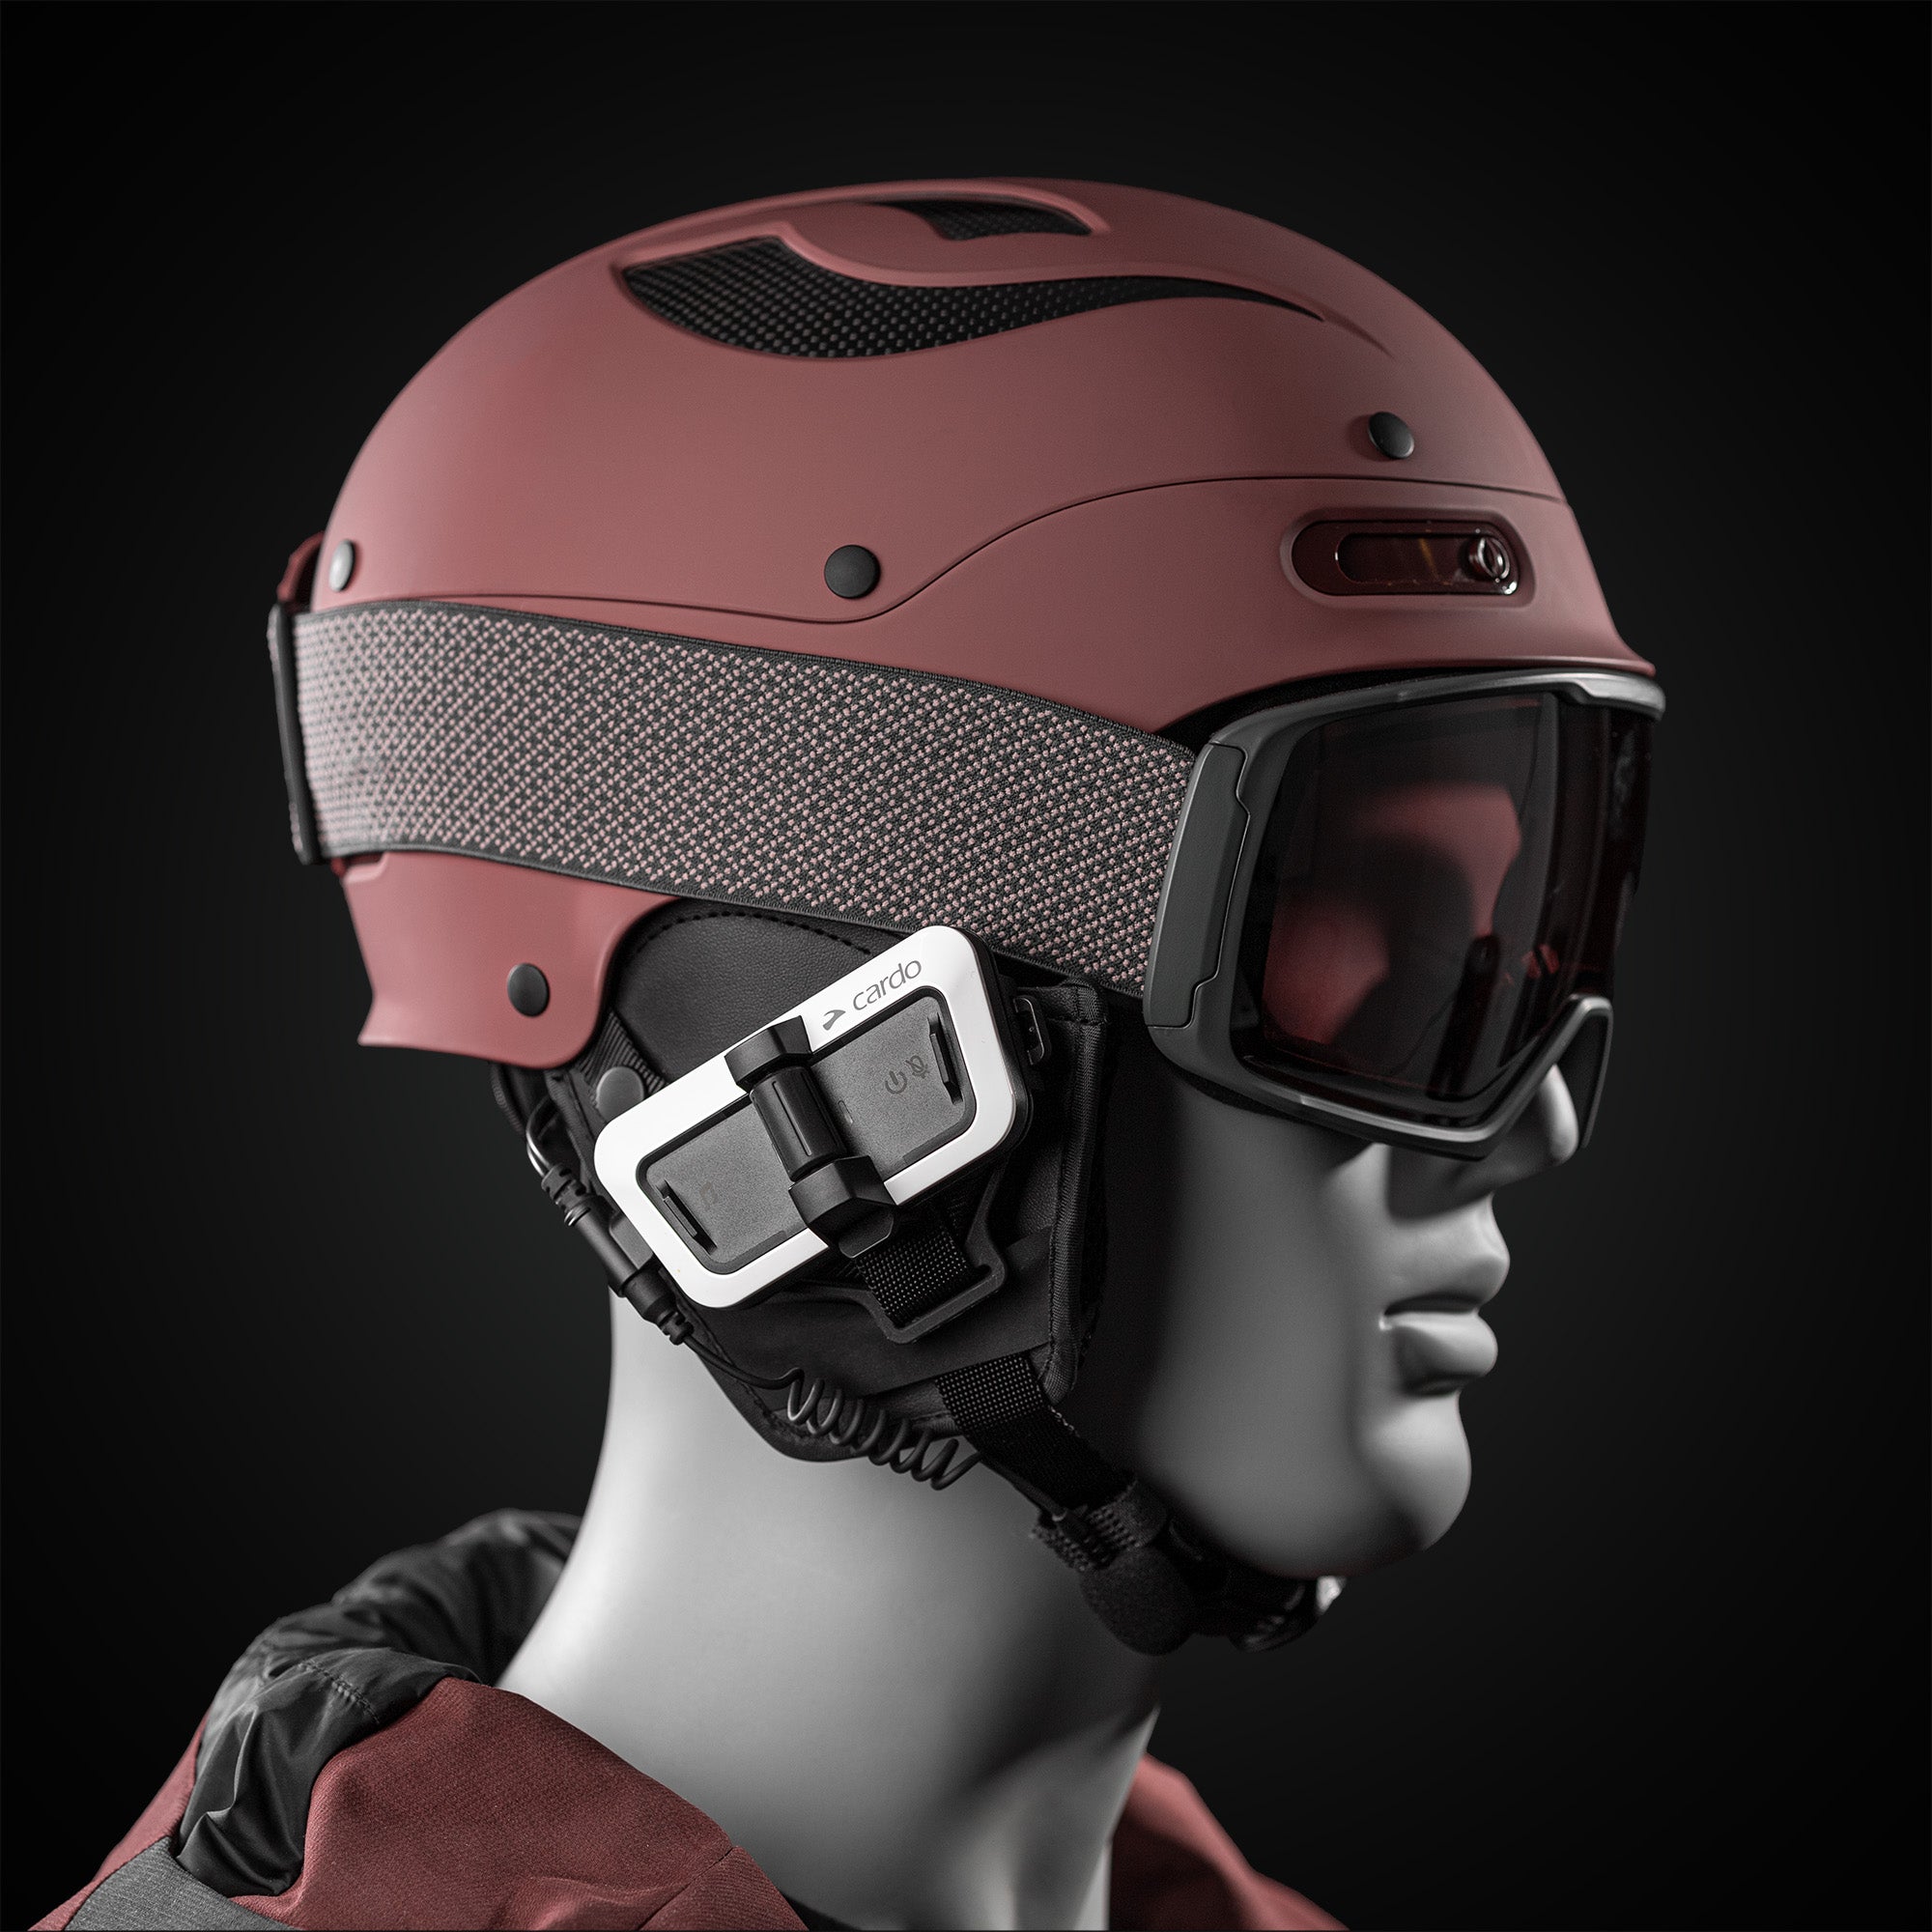 Bluetooth Headsets & Speakers for Helmets | Cardo Systems